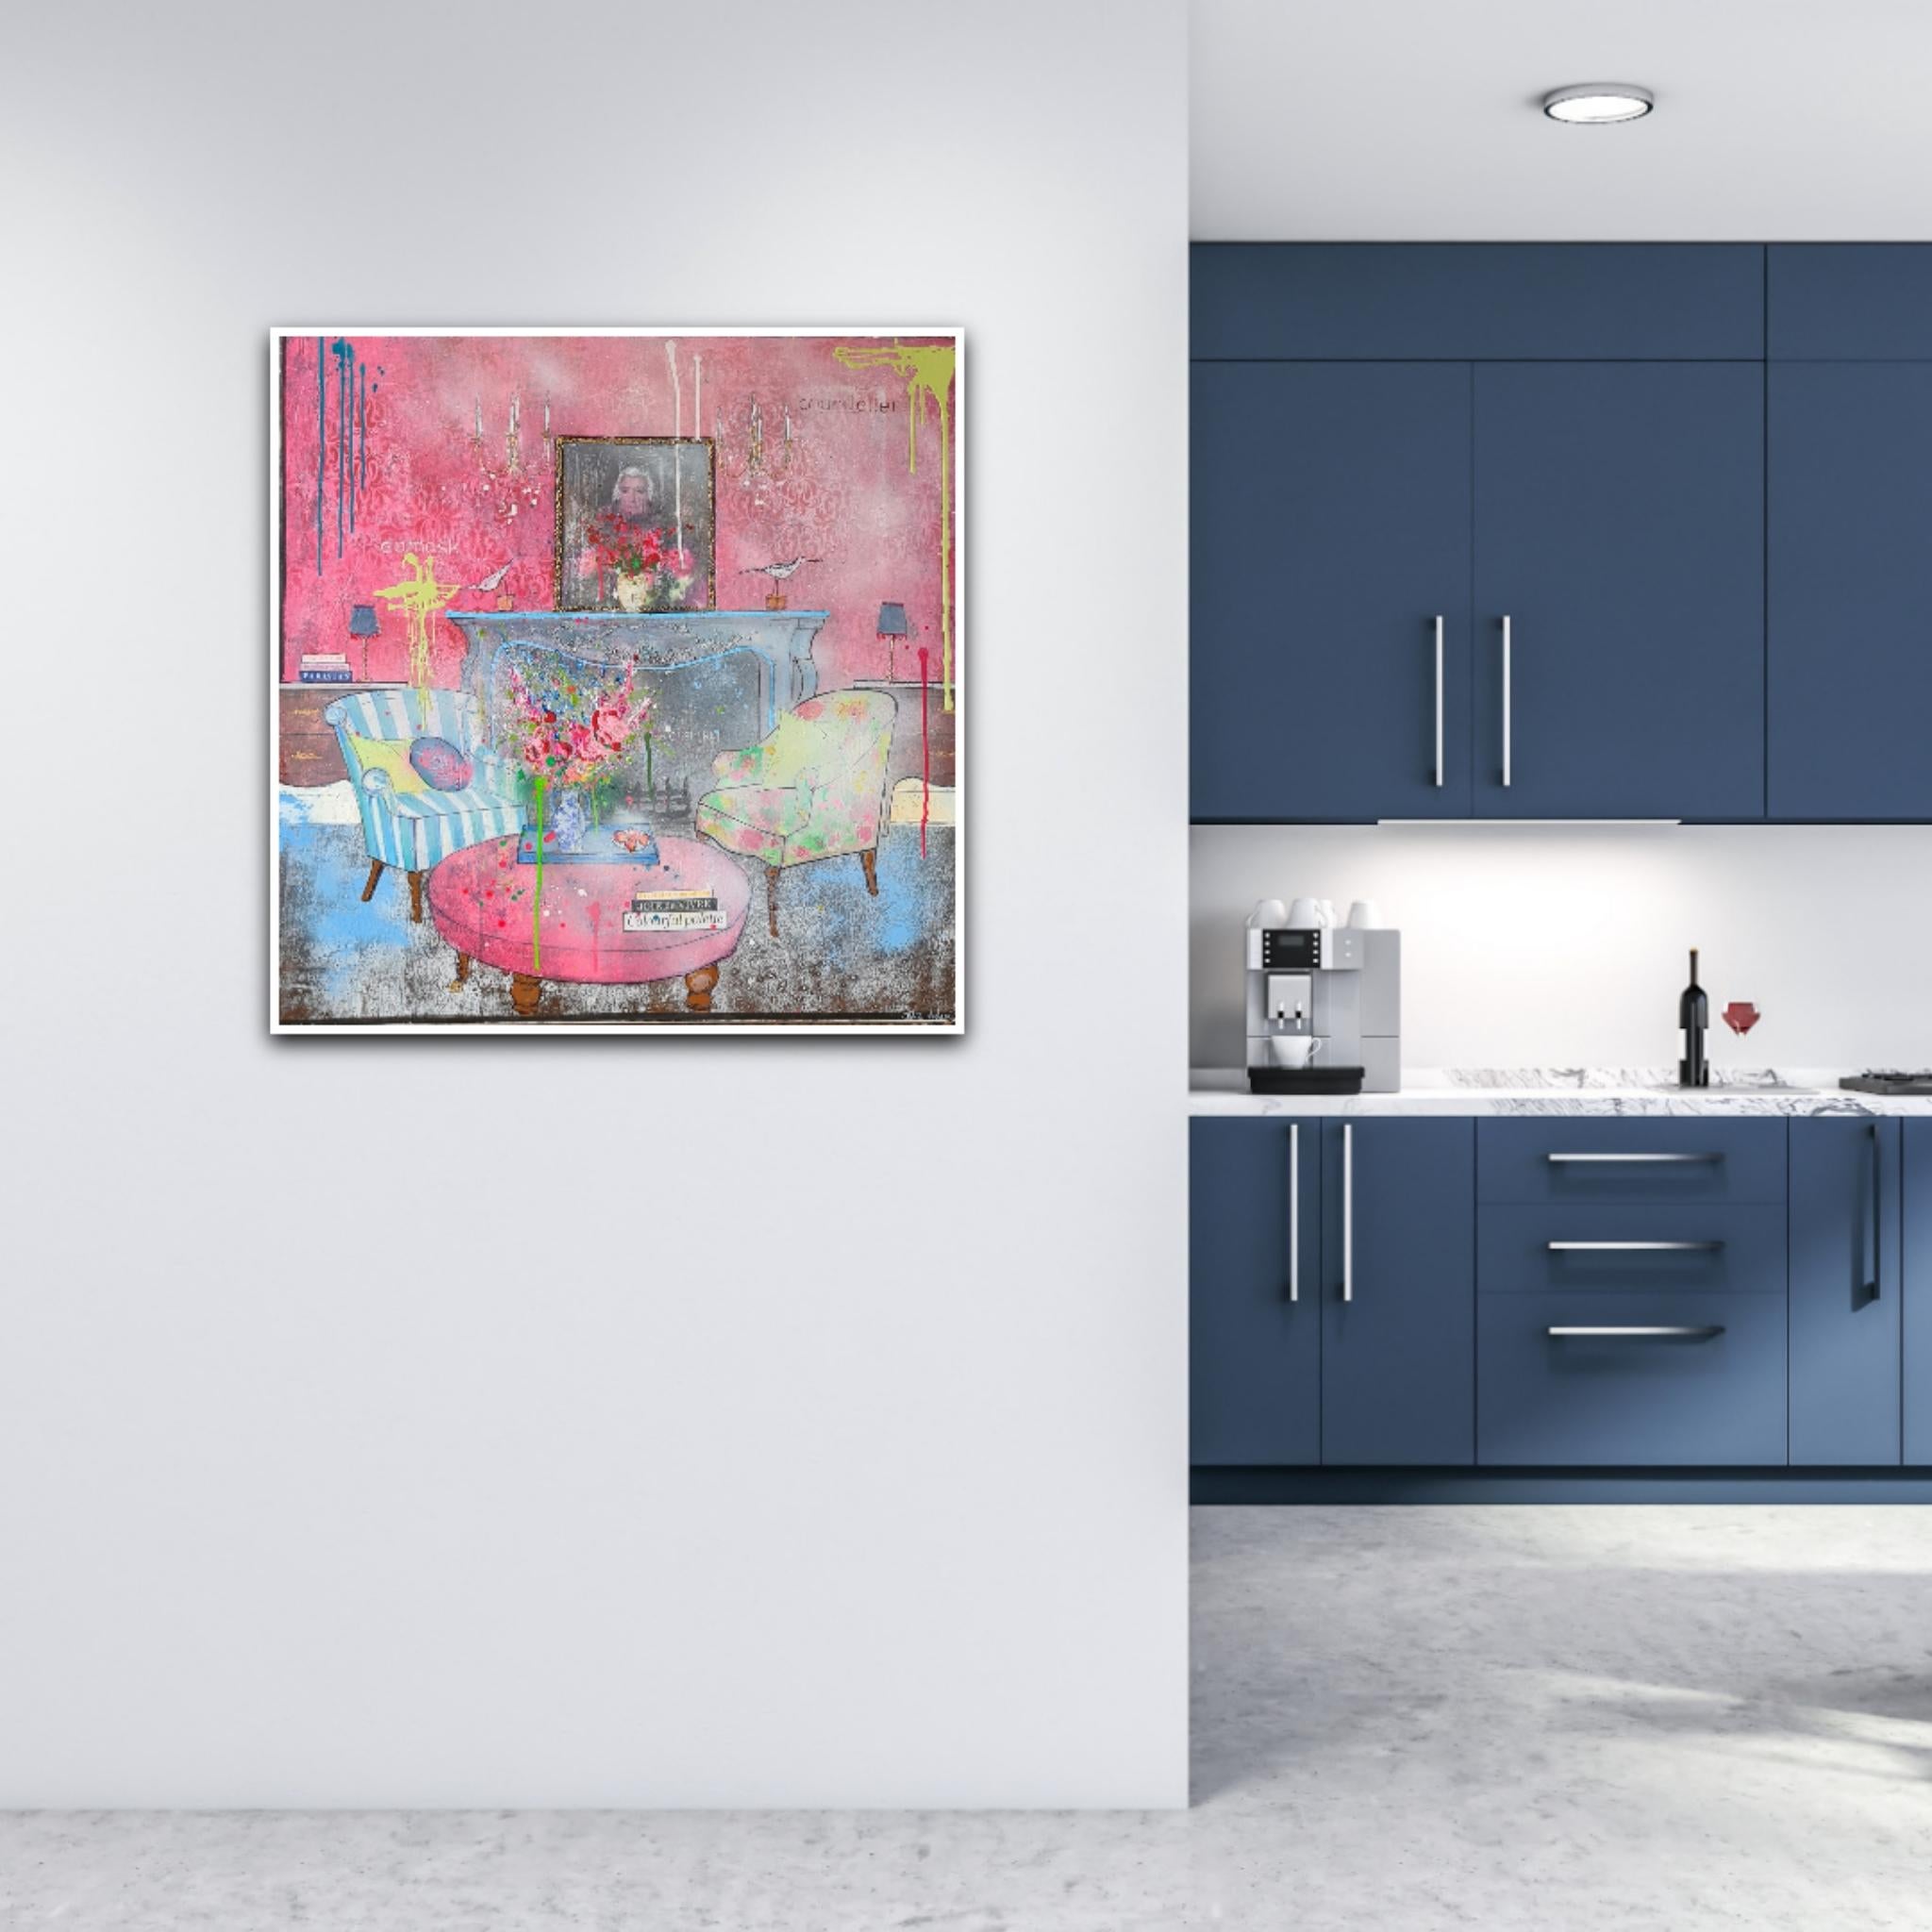 Joie de Vivre by Julia Adams is a large 90 x 90cm square interior painting on a deep edged 25mm canvas from her Interior Spaces series. The colours she has used are vibrant pinks/blues/lime greens, depicting a colourful, eclectic, vibrant interior